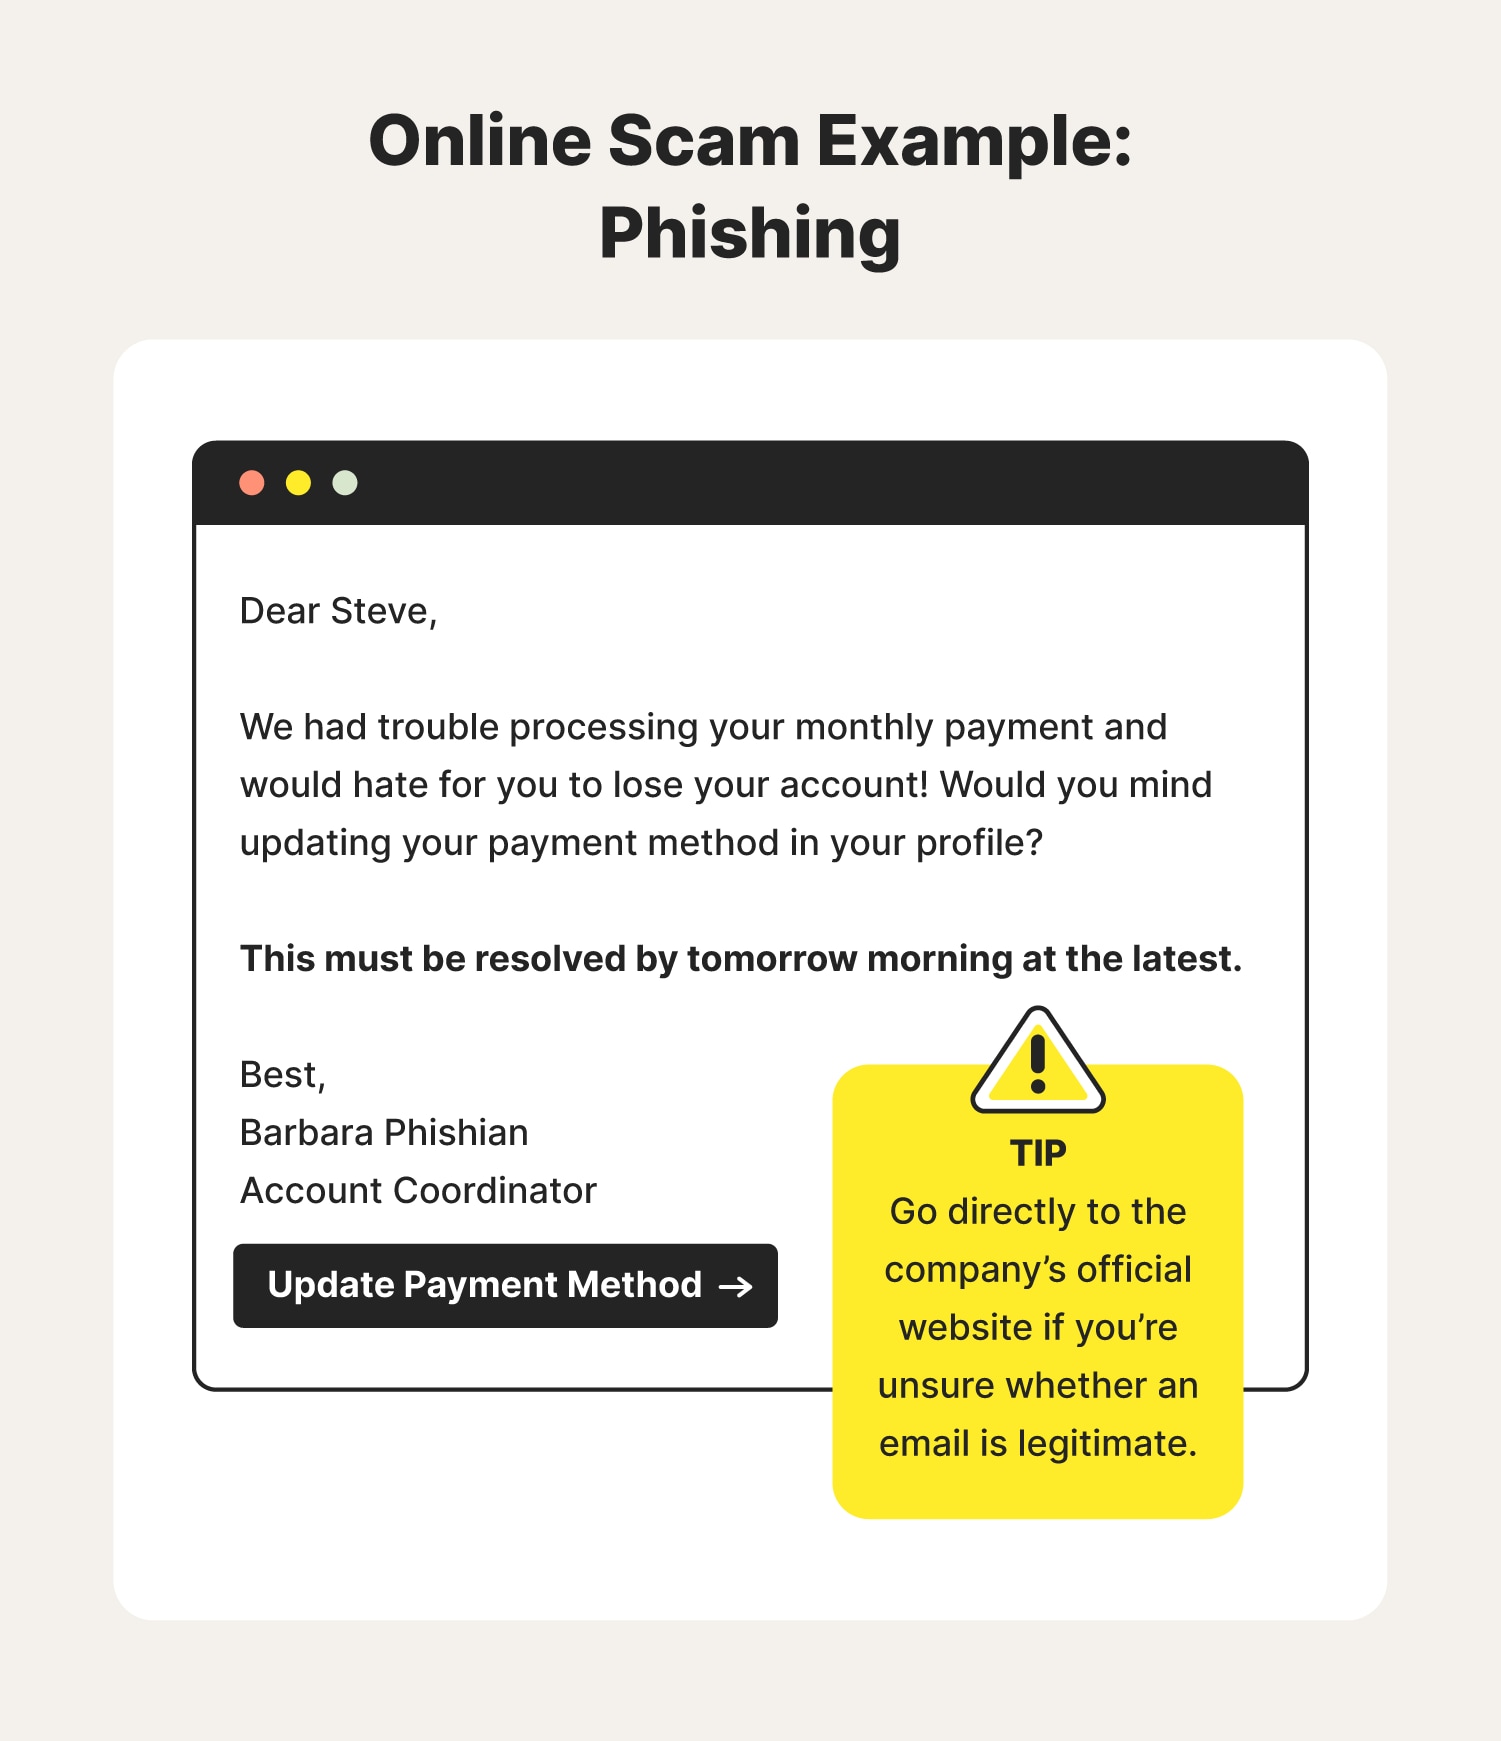 An example message depicts what typical phishing online scams look like. 